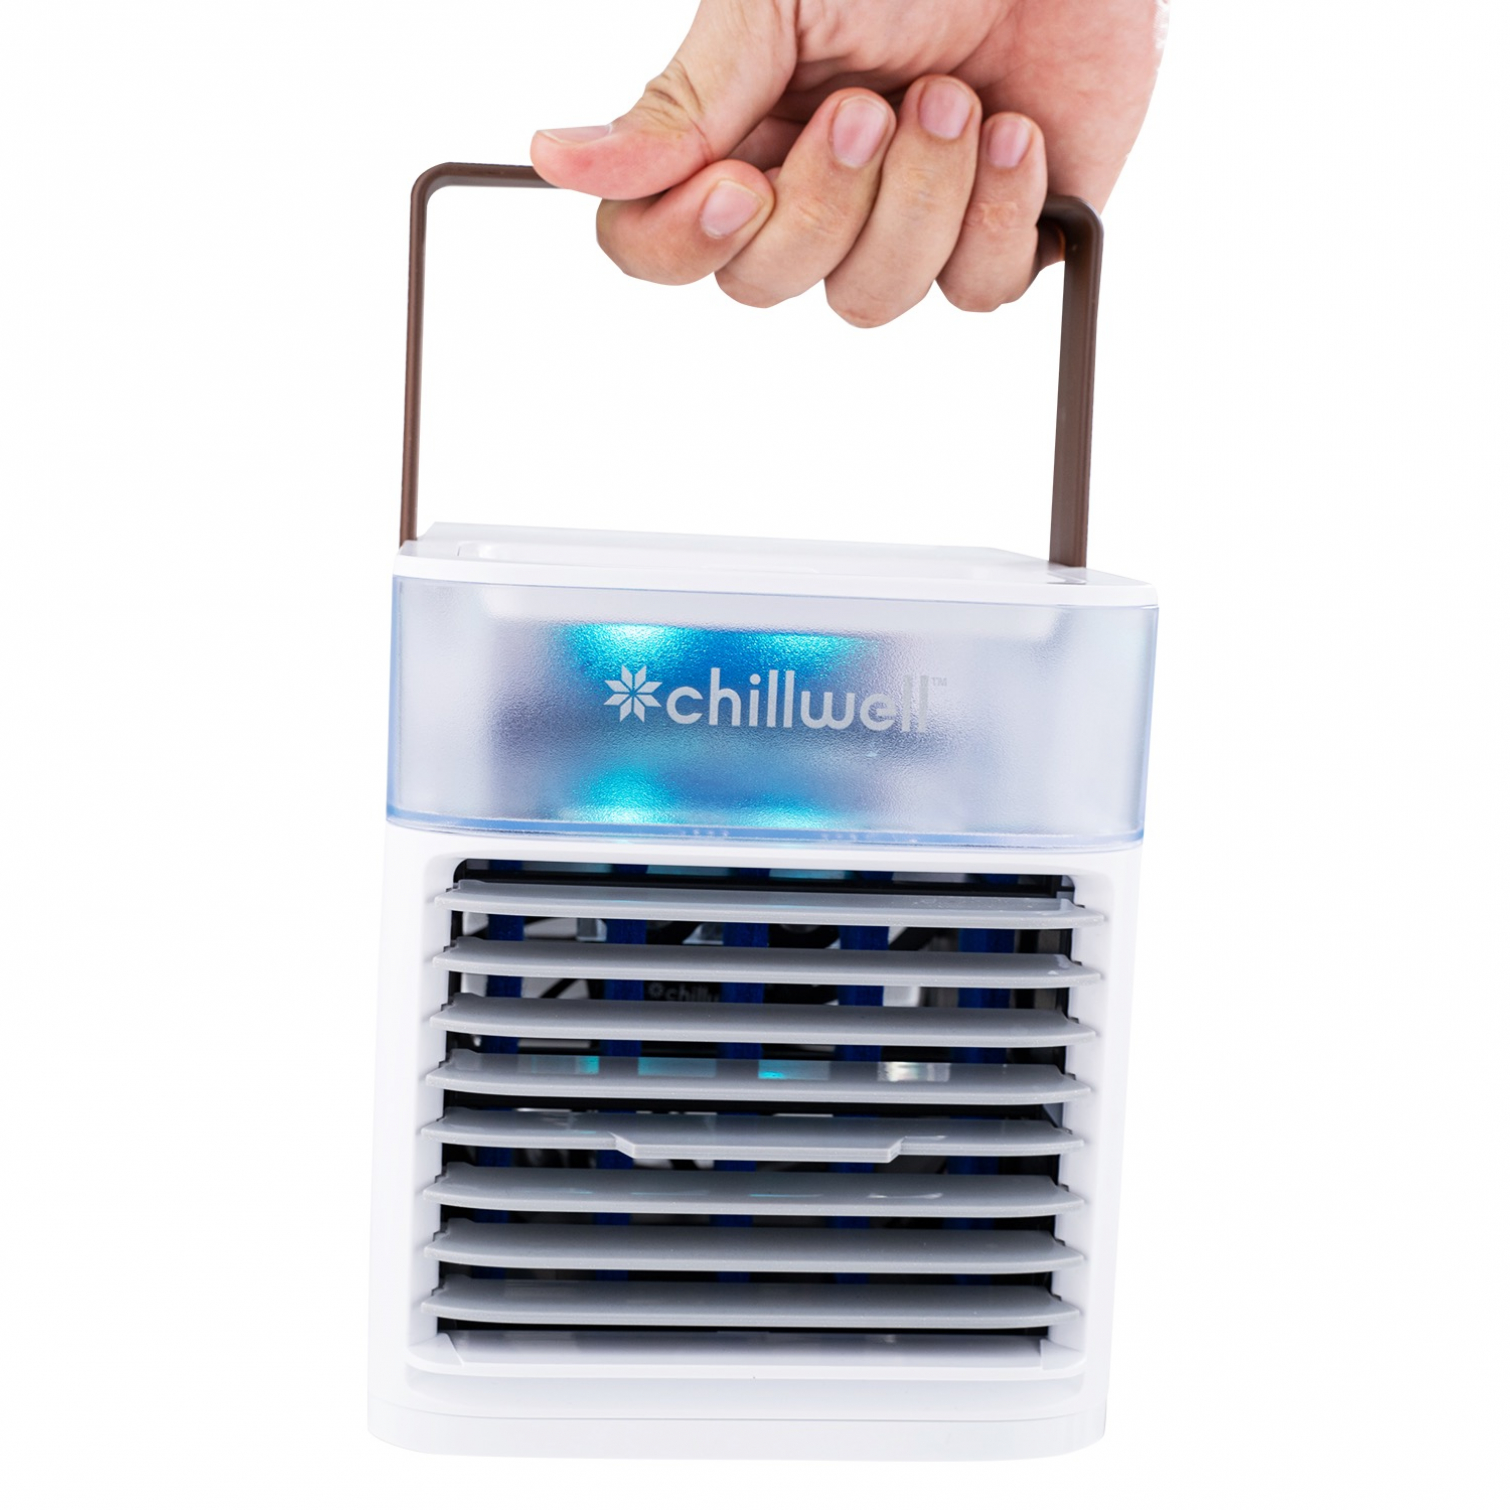 Chillwell AC Portable Cordless Air Cooler